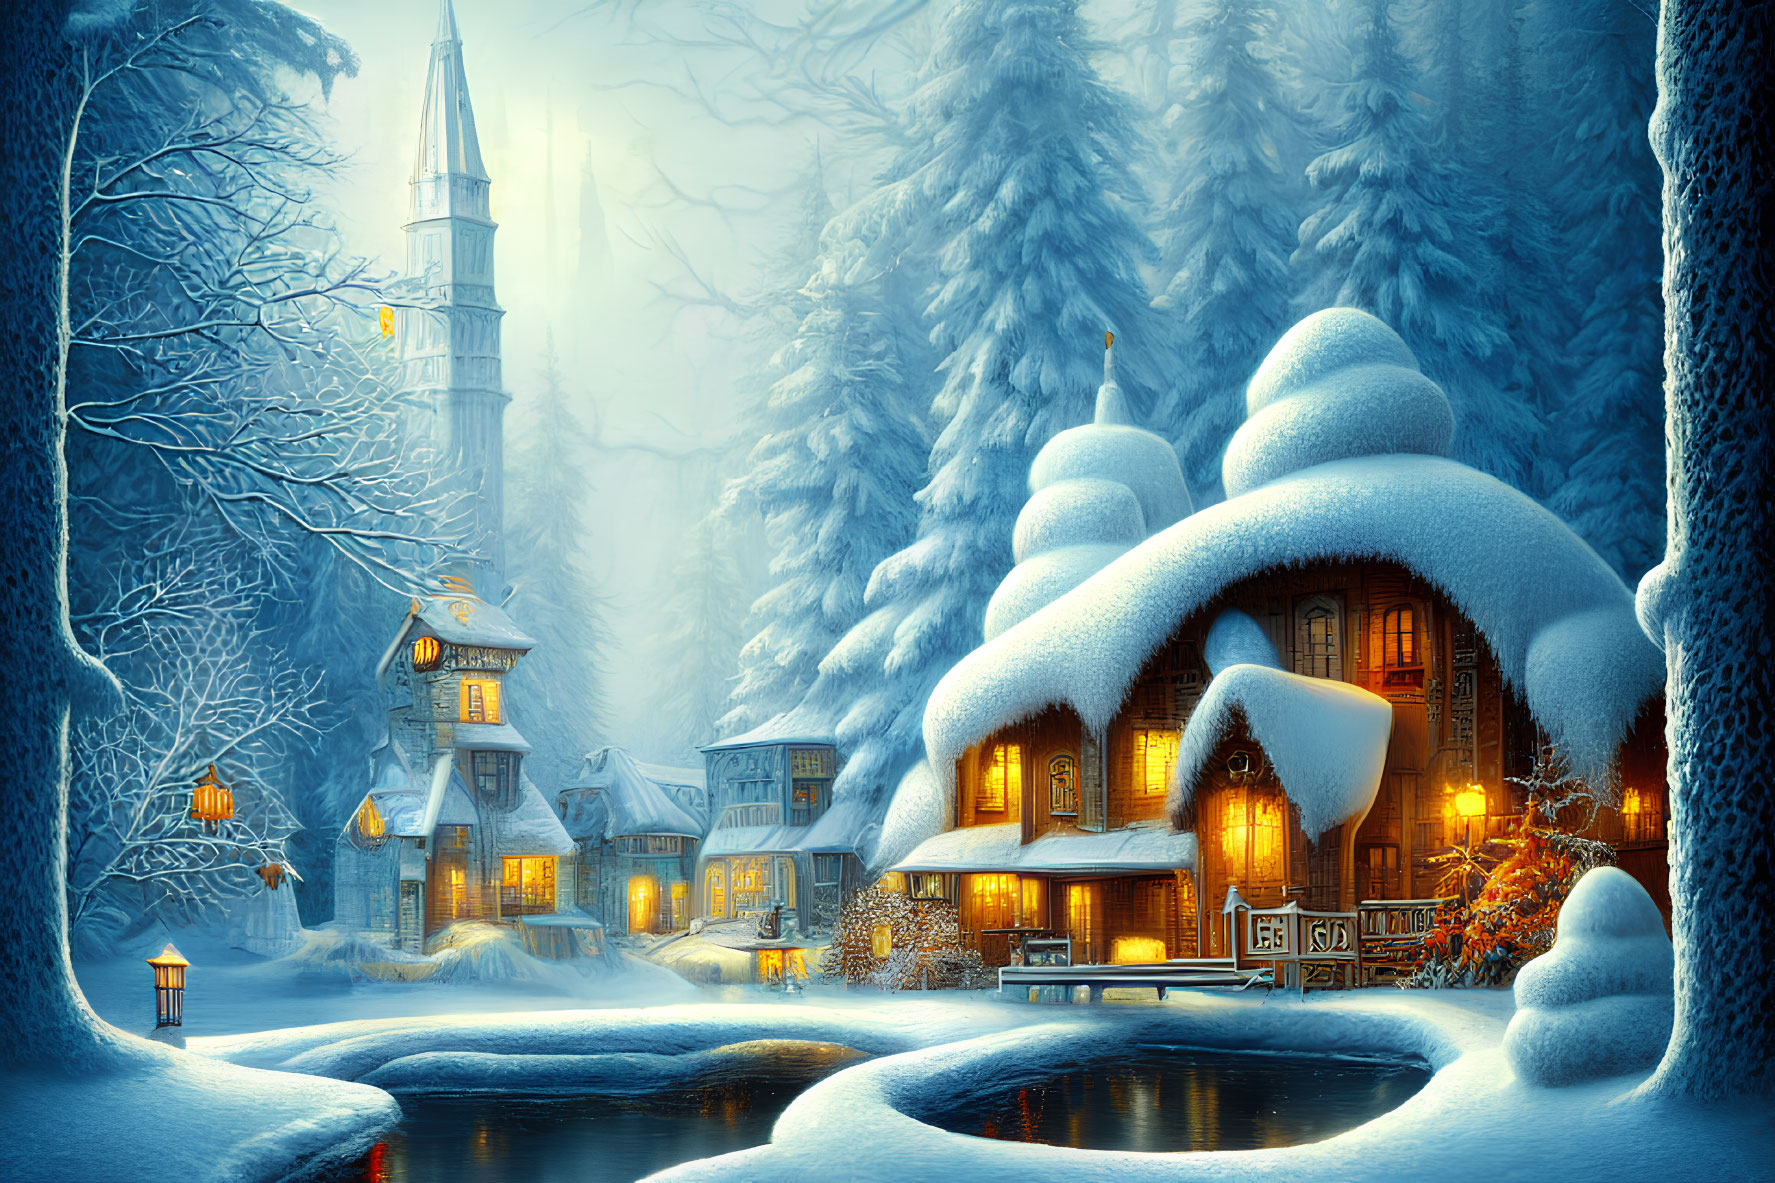 Snow-covered winter village with cottages, frozen river, and forest ambiance